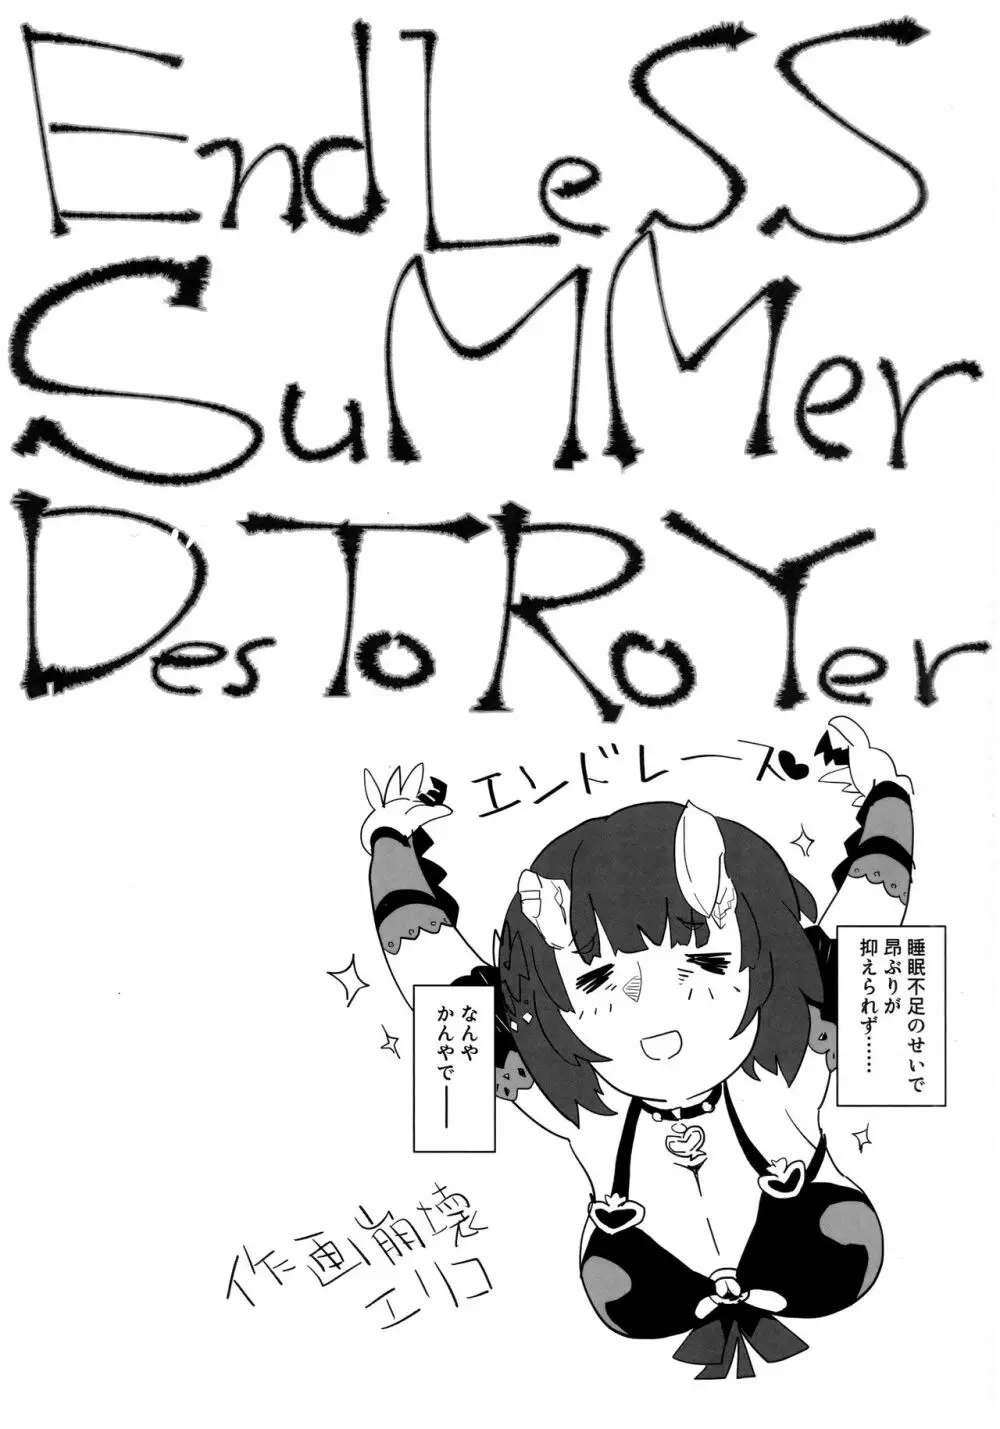 EndLeSS SuMMer DesTRoYer Page.3